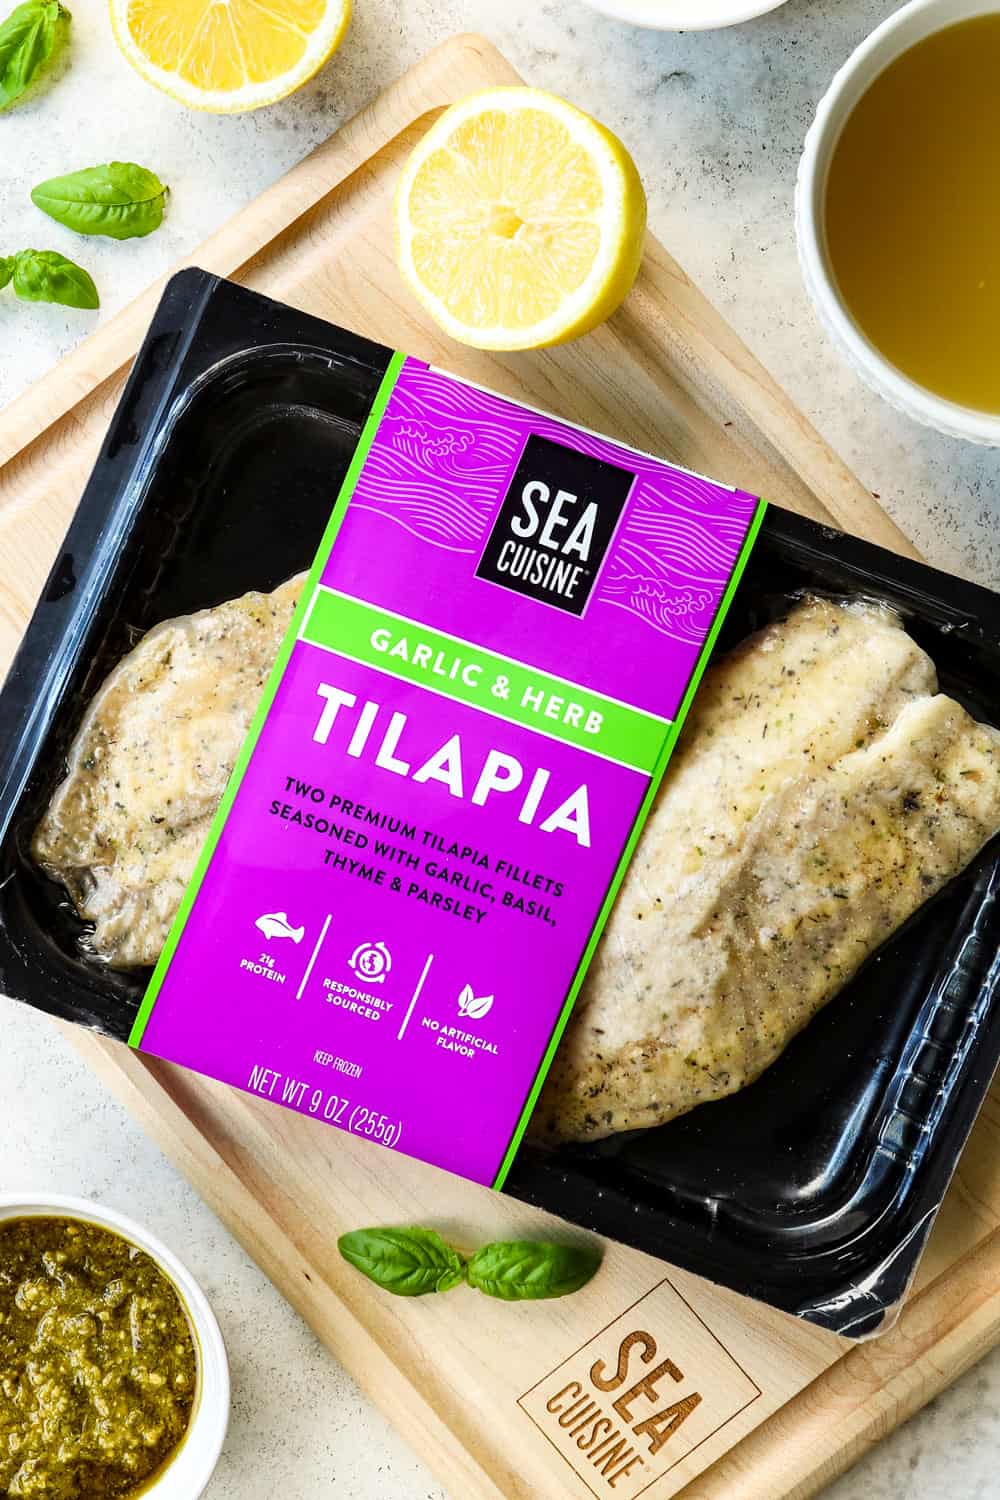 top view showing what tilapia looks like before cooking the recipe